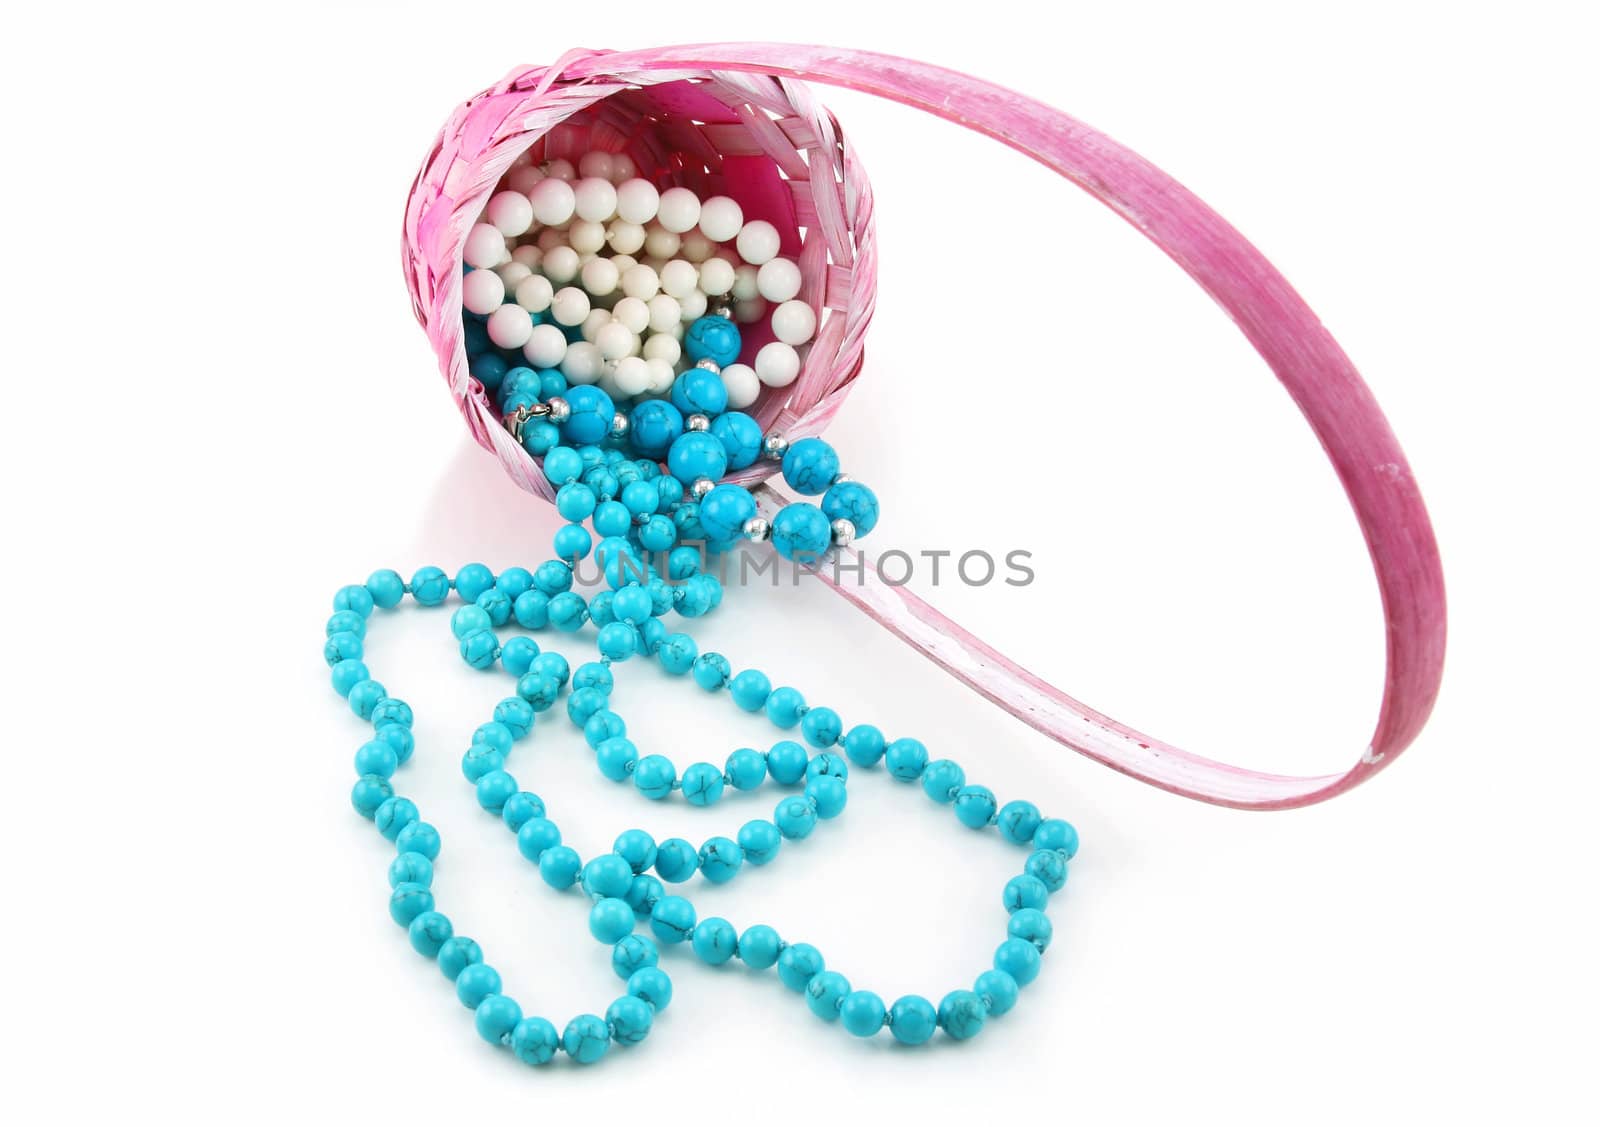 Colored Pearl Beads in Pink Wicker Basket Isolated on White Background